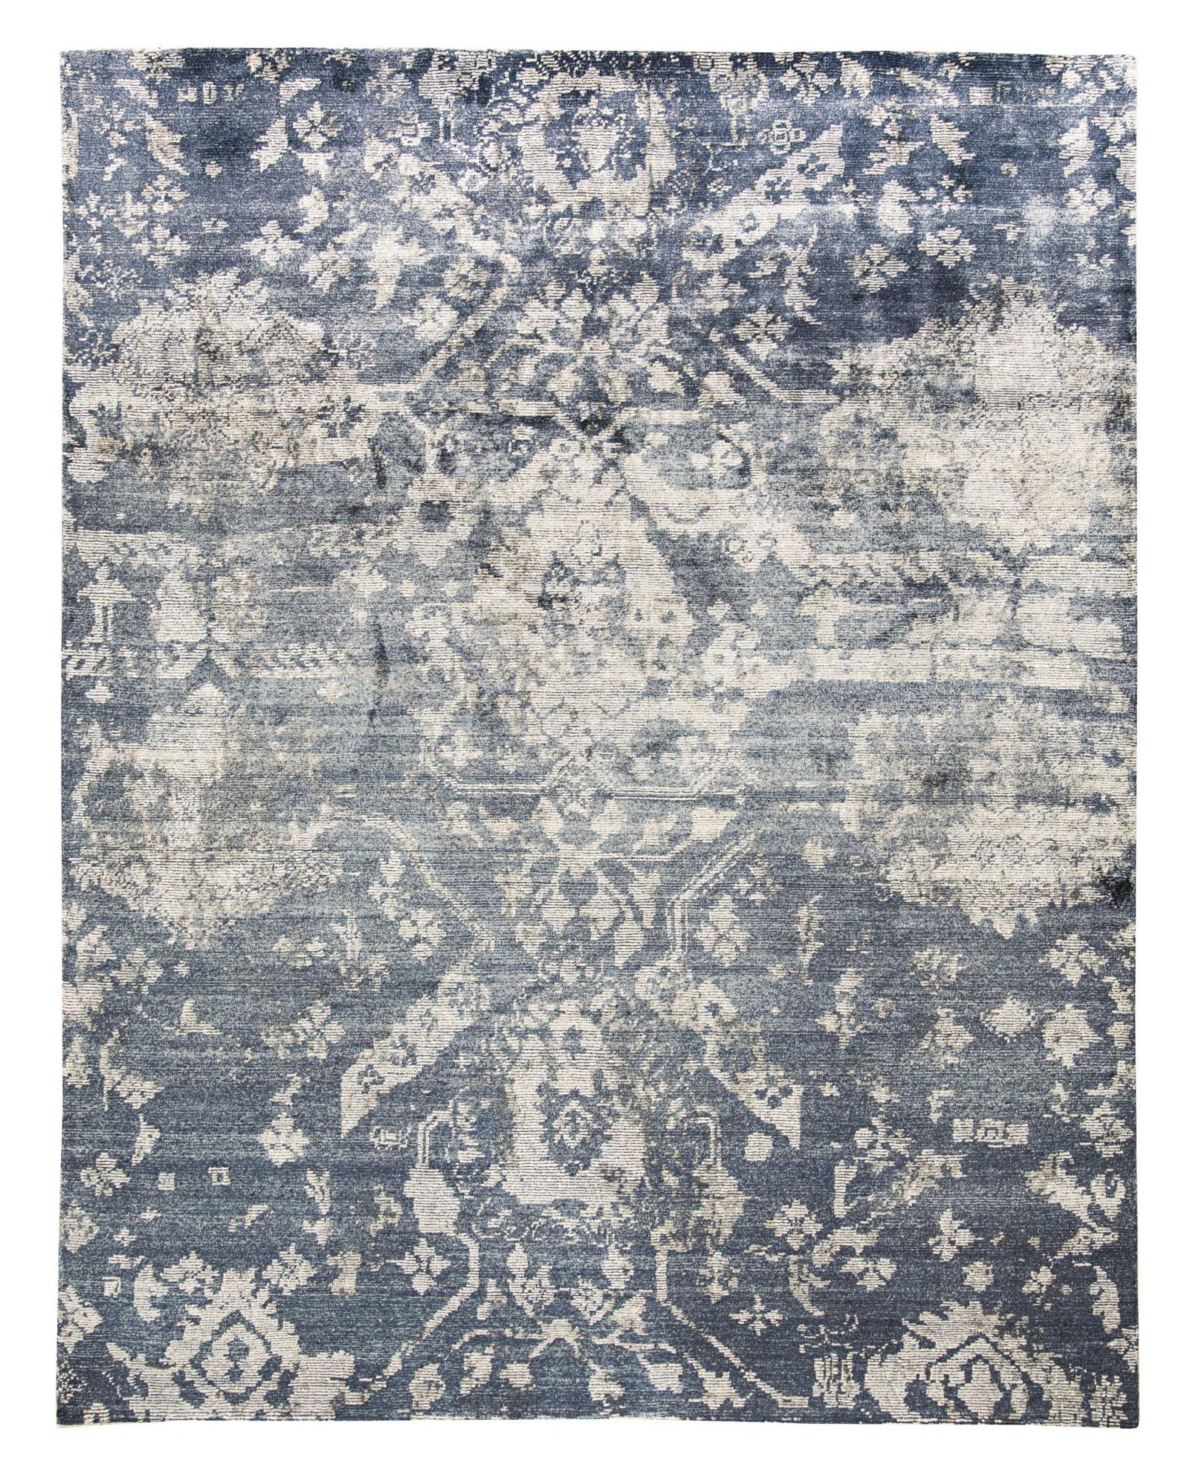 Nourison Home Lucent LCN06 Blue 8'6in x 11'6in Area Rug - Blue